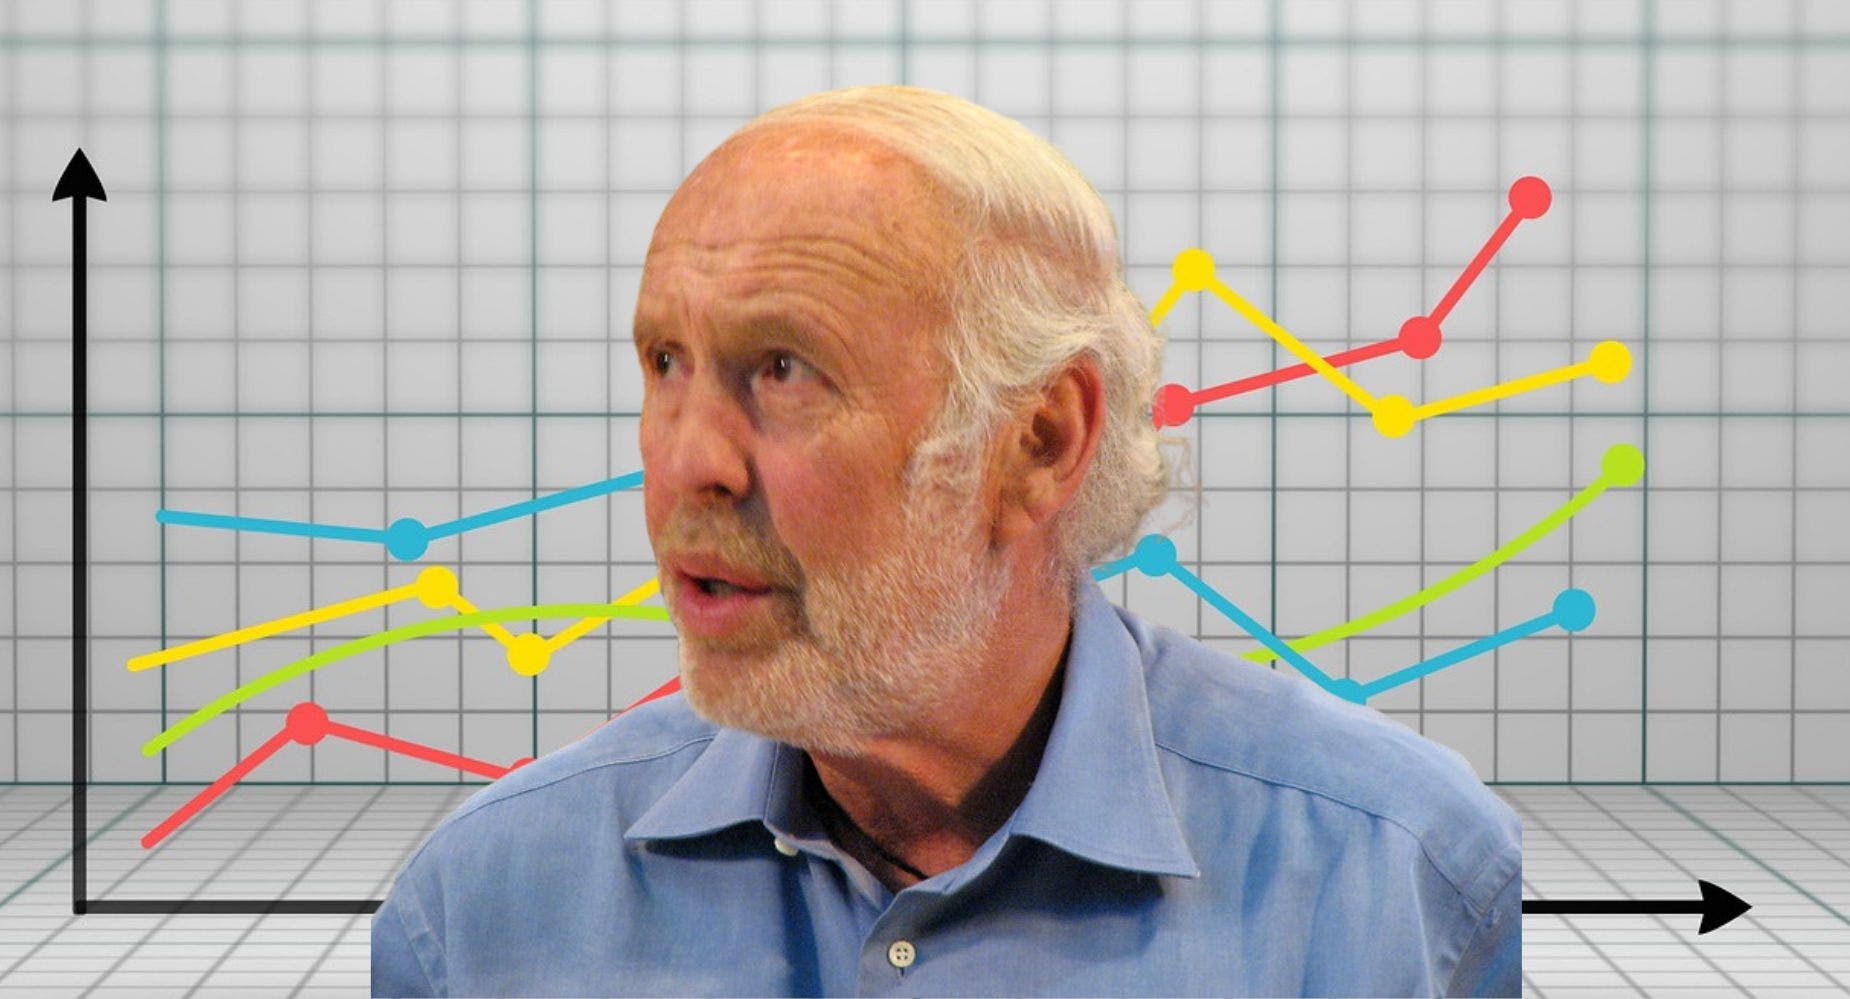 'Man Who Solved The Market,' Quant Legend James Simons, Last Held These Two Dividend Stocks